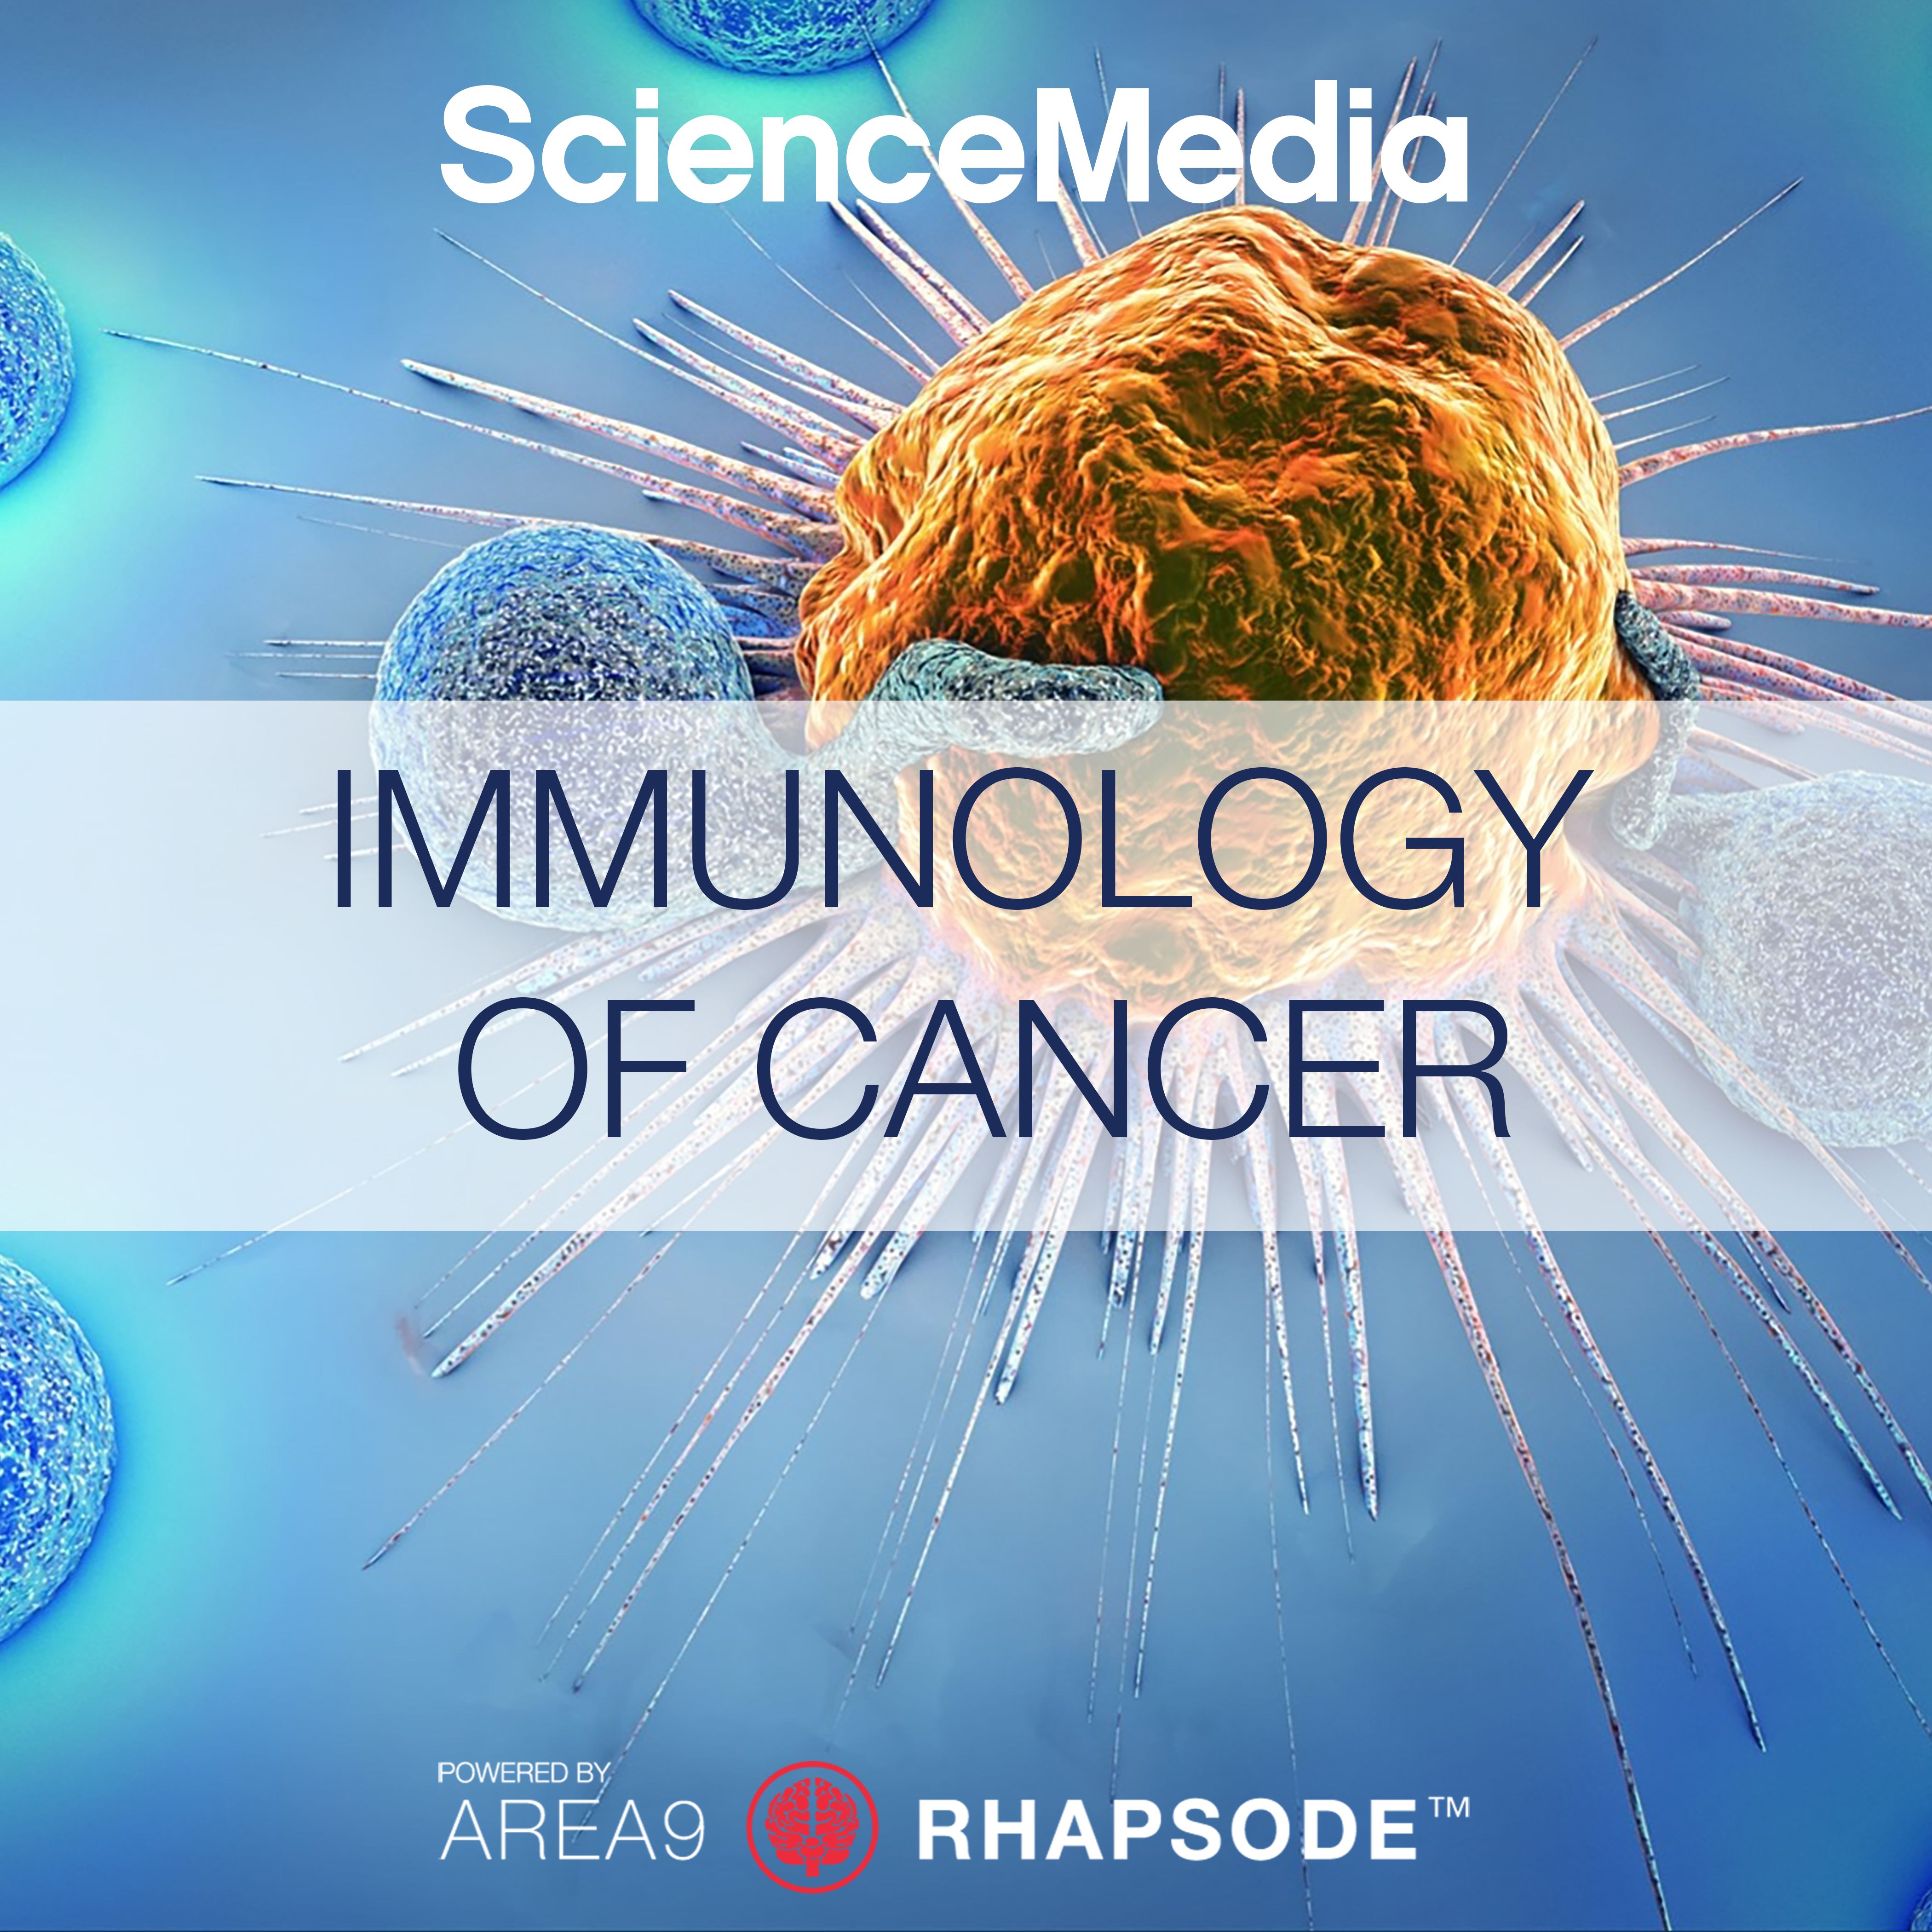 ONCOLOGY Immunology of Cancer AREA9 LYCEUM and SCIENCEMEDIA Adaptive Medical & Clinical Training TILE